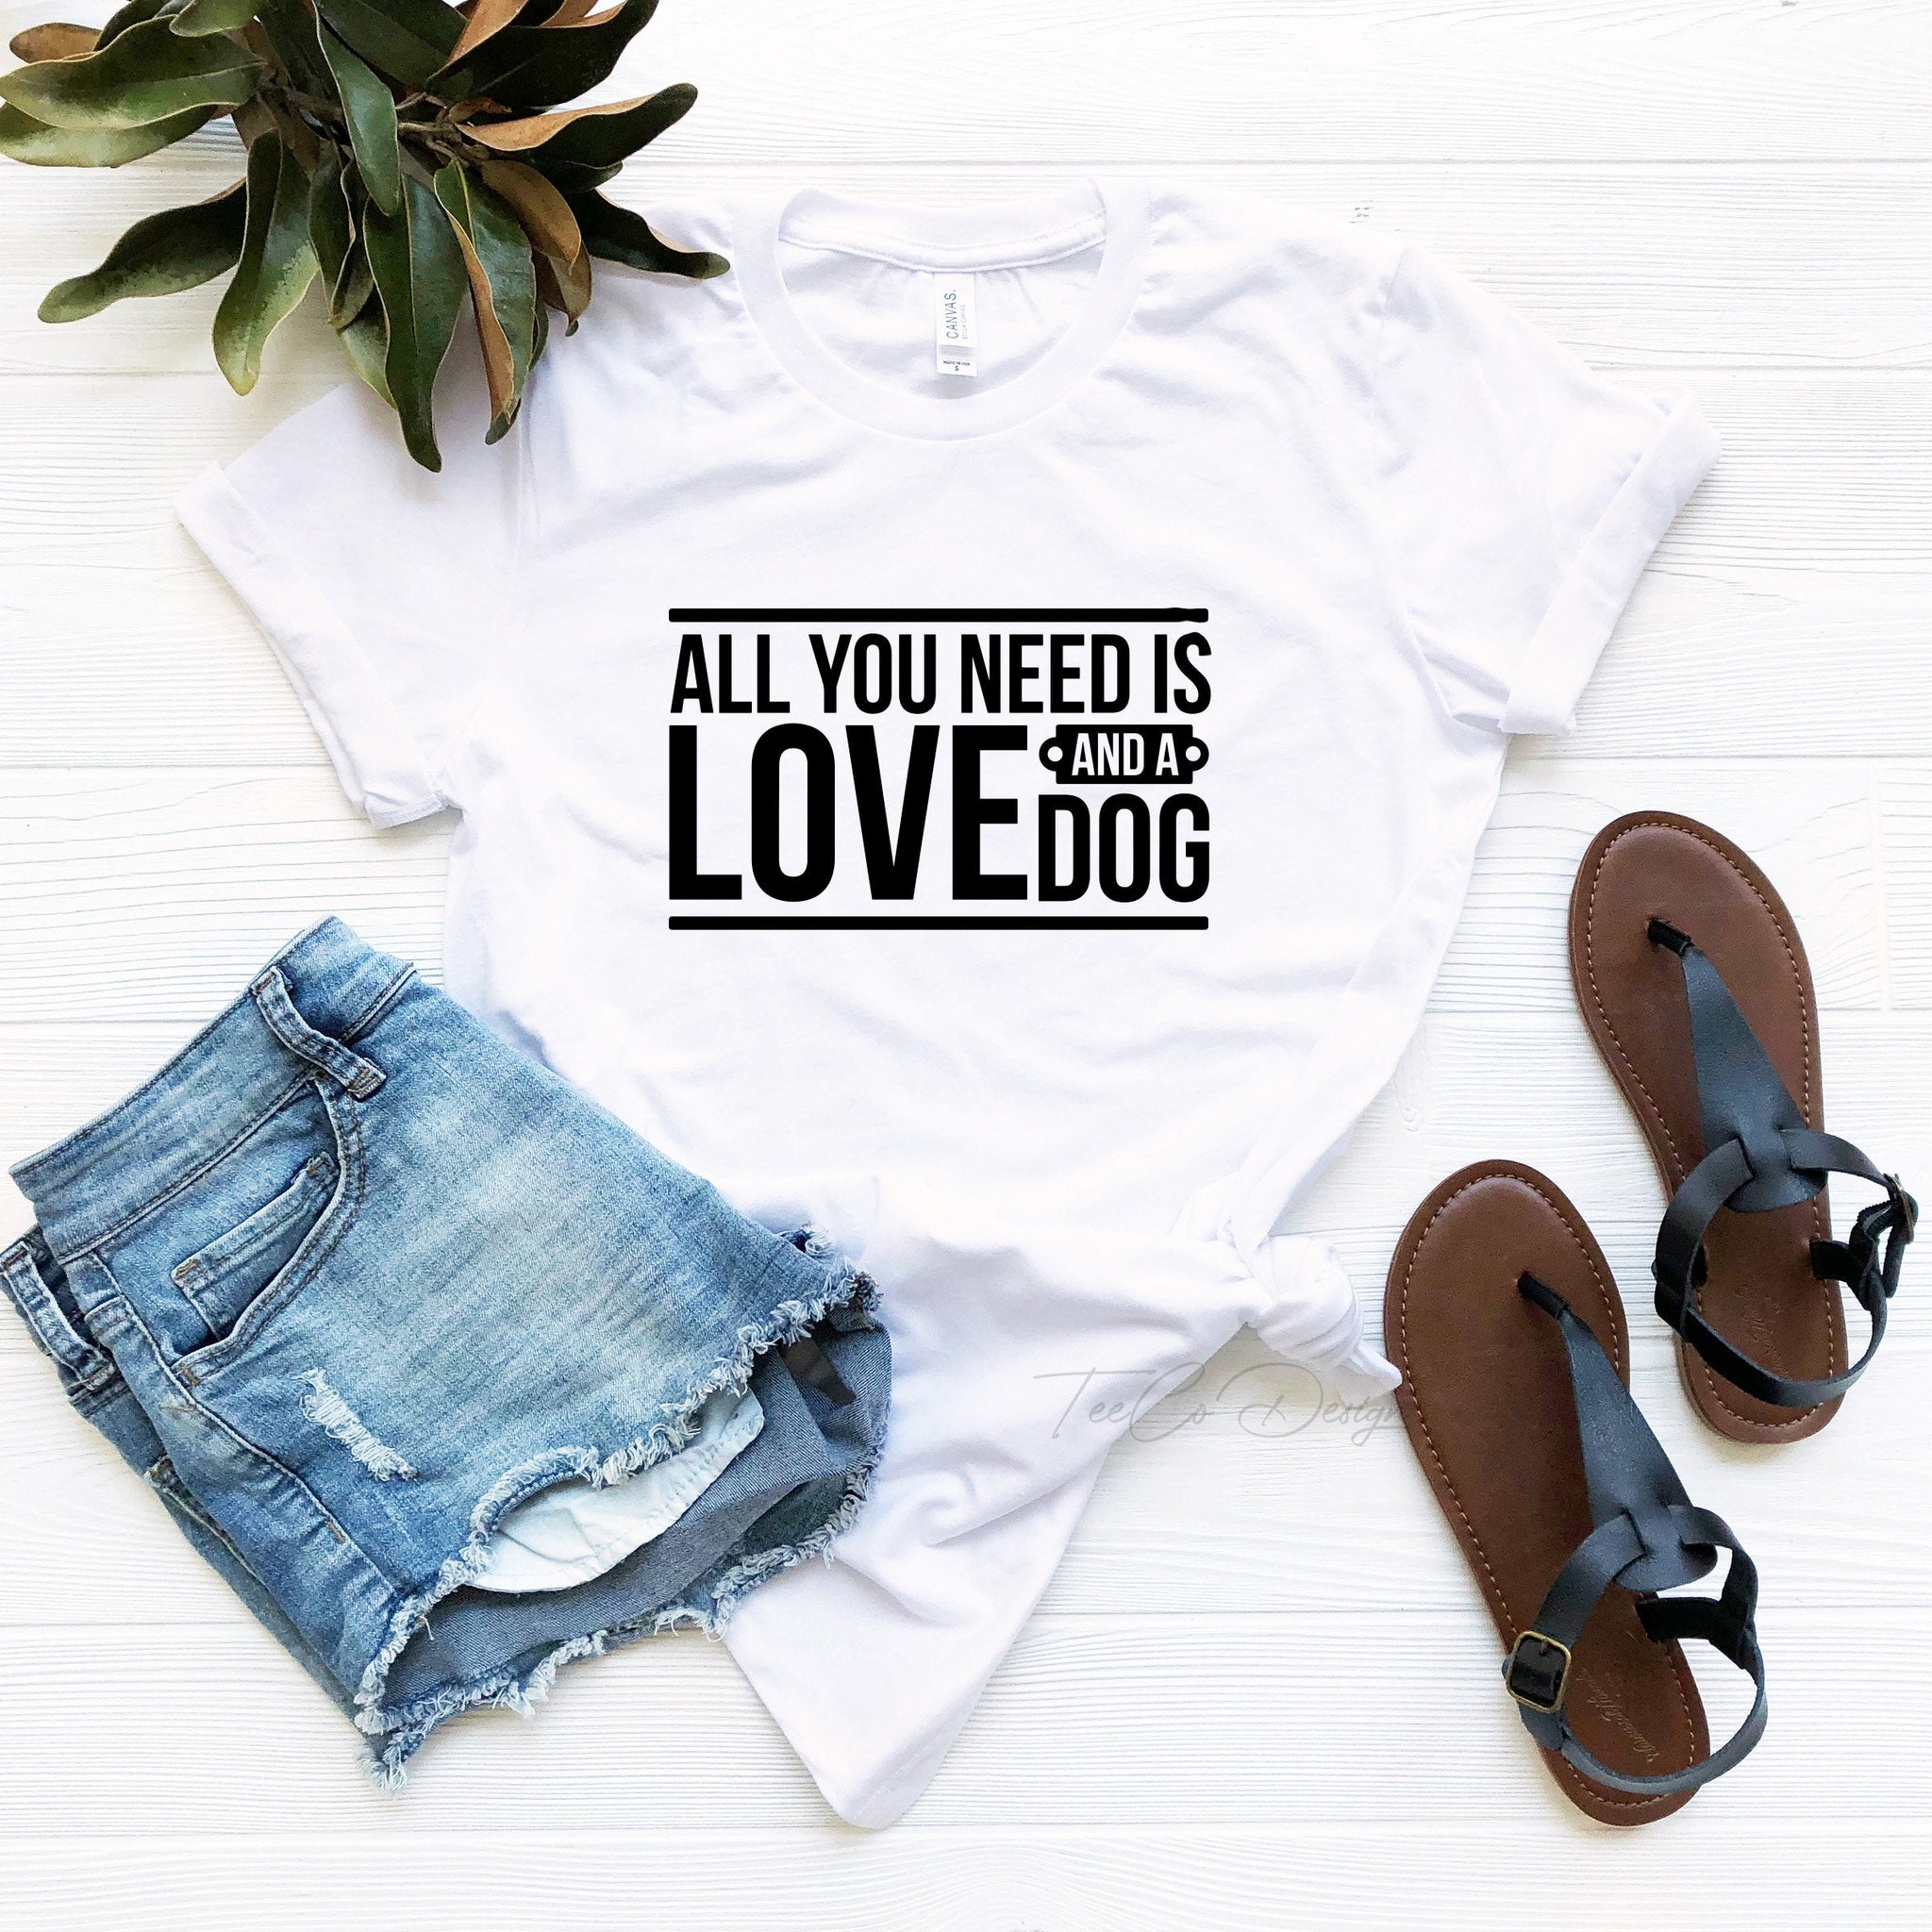 You need Love and a Dog! - Fastdeliverytees.com